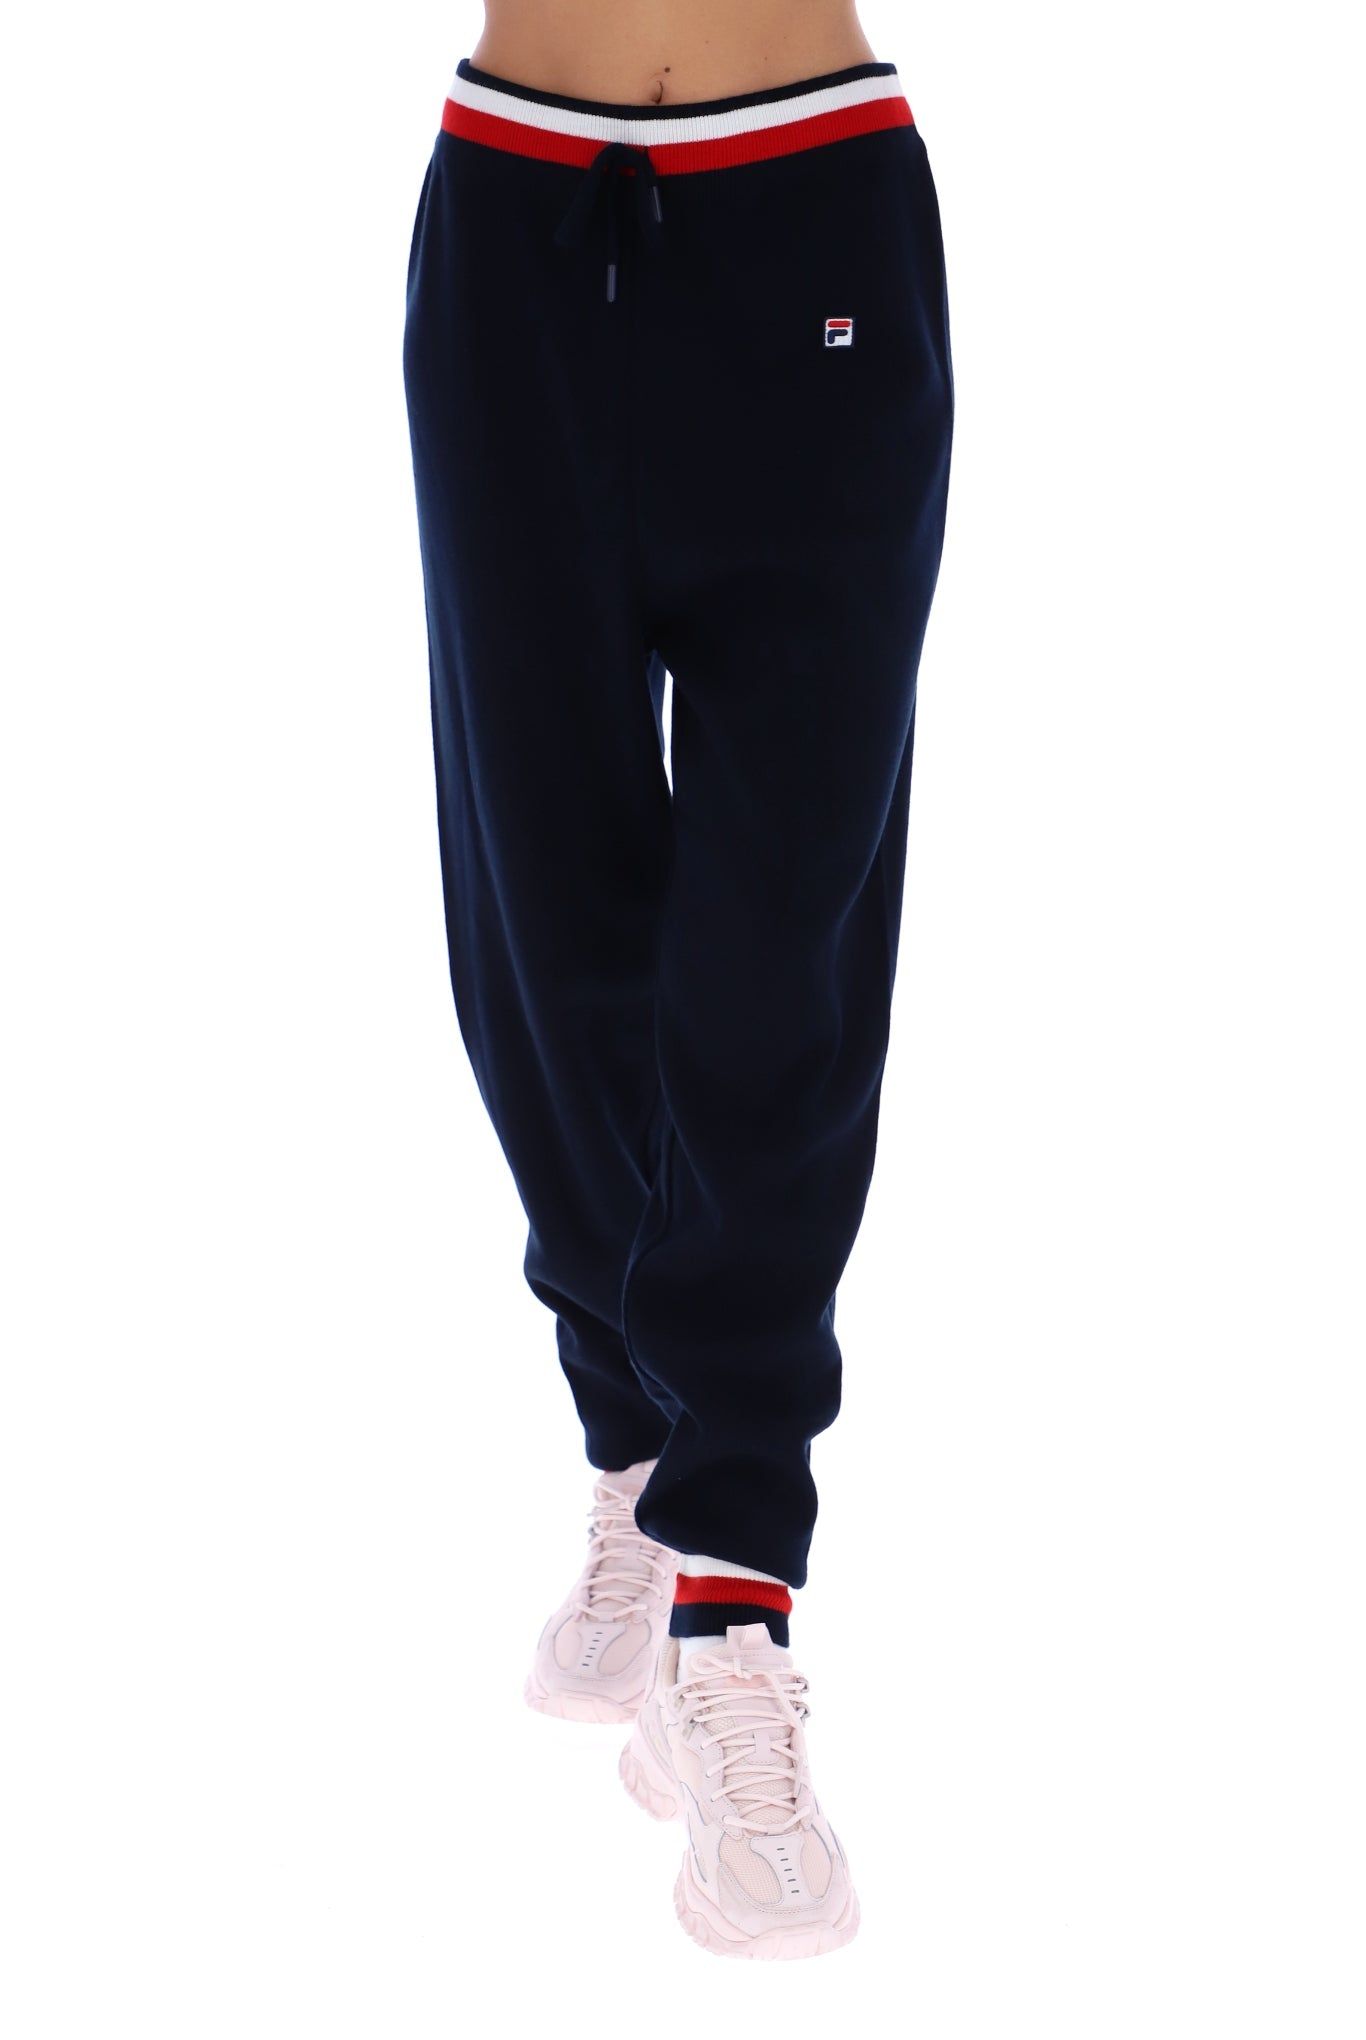 Ladies Frankie Navy/Red/White Knit Pant-Front View